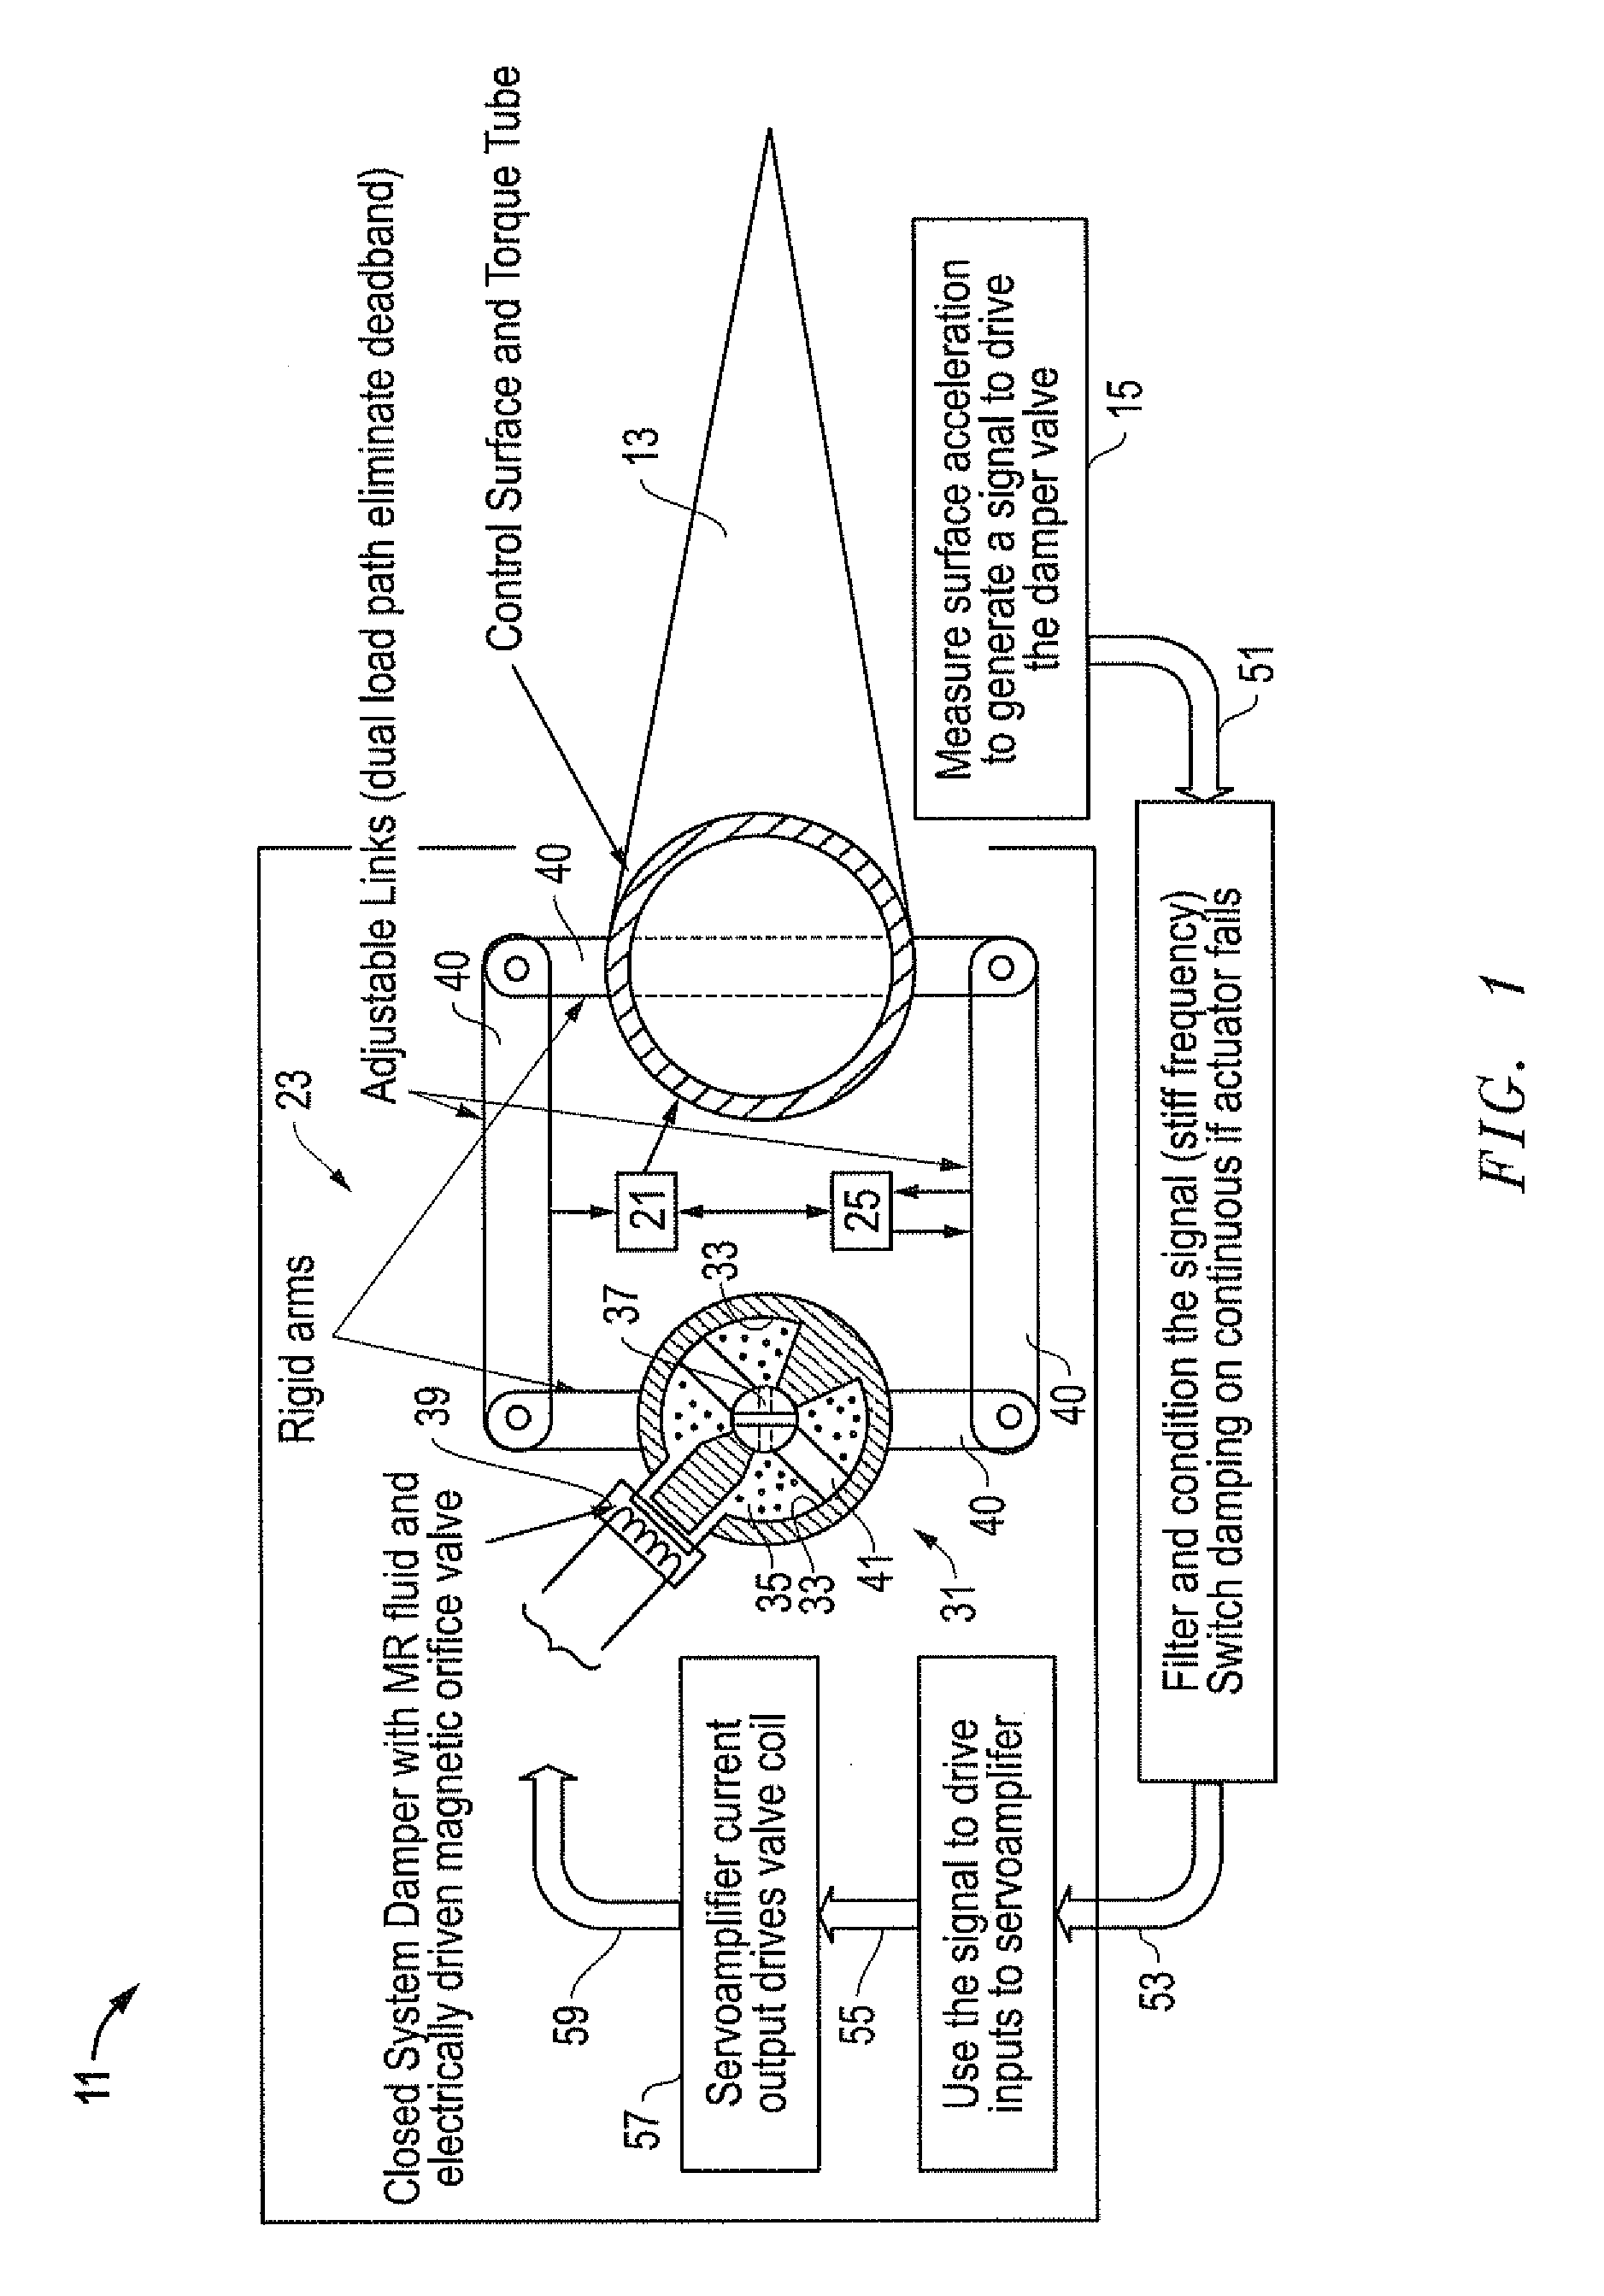 System, method and apparatus for control surface with dynamic compensation